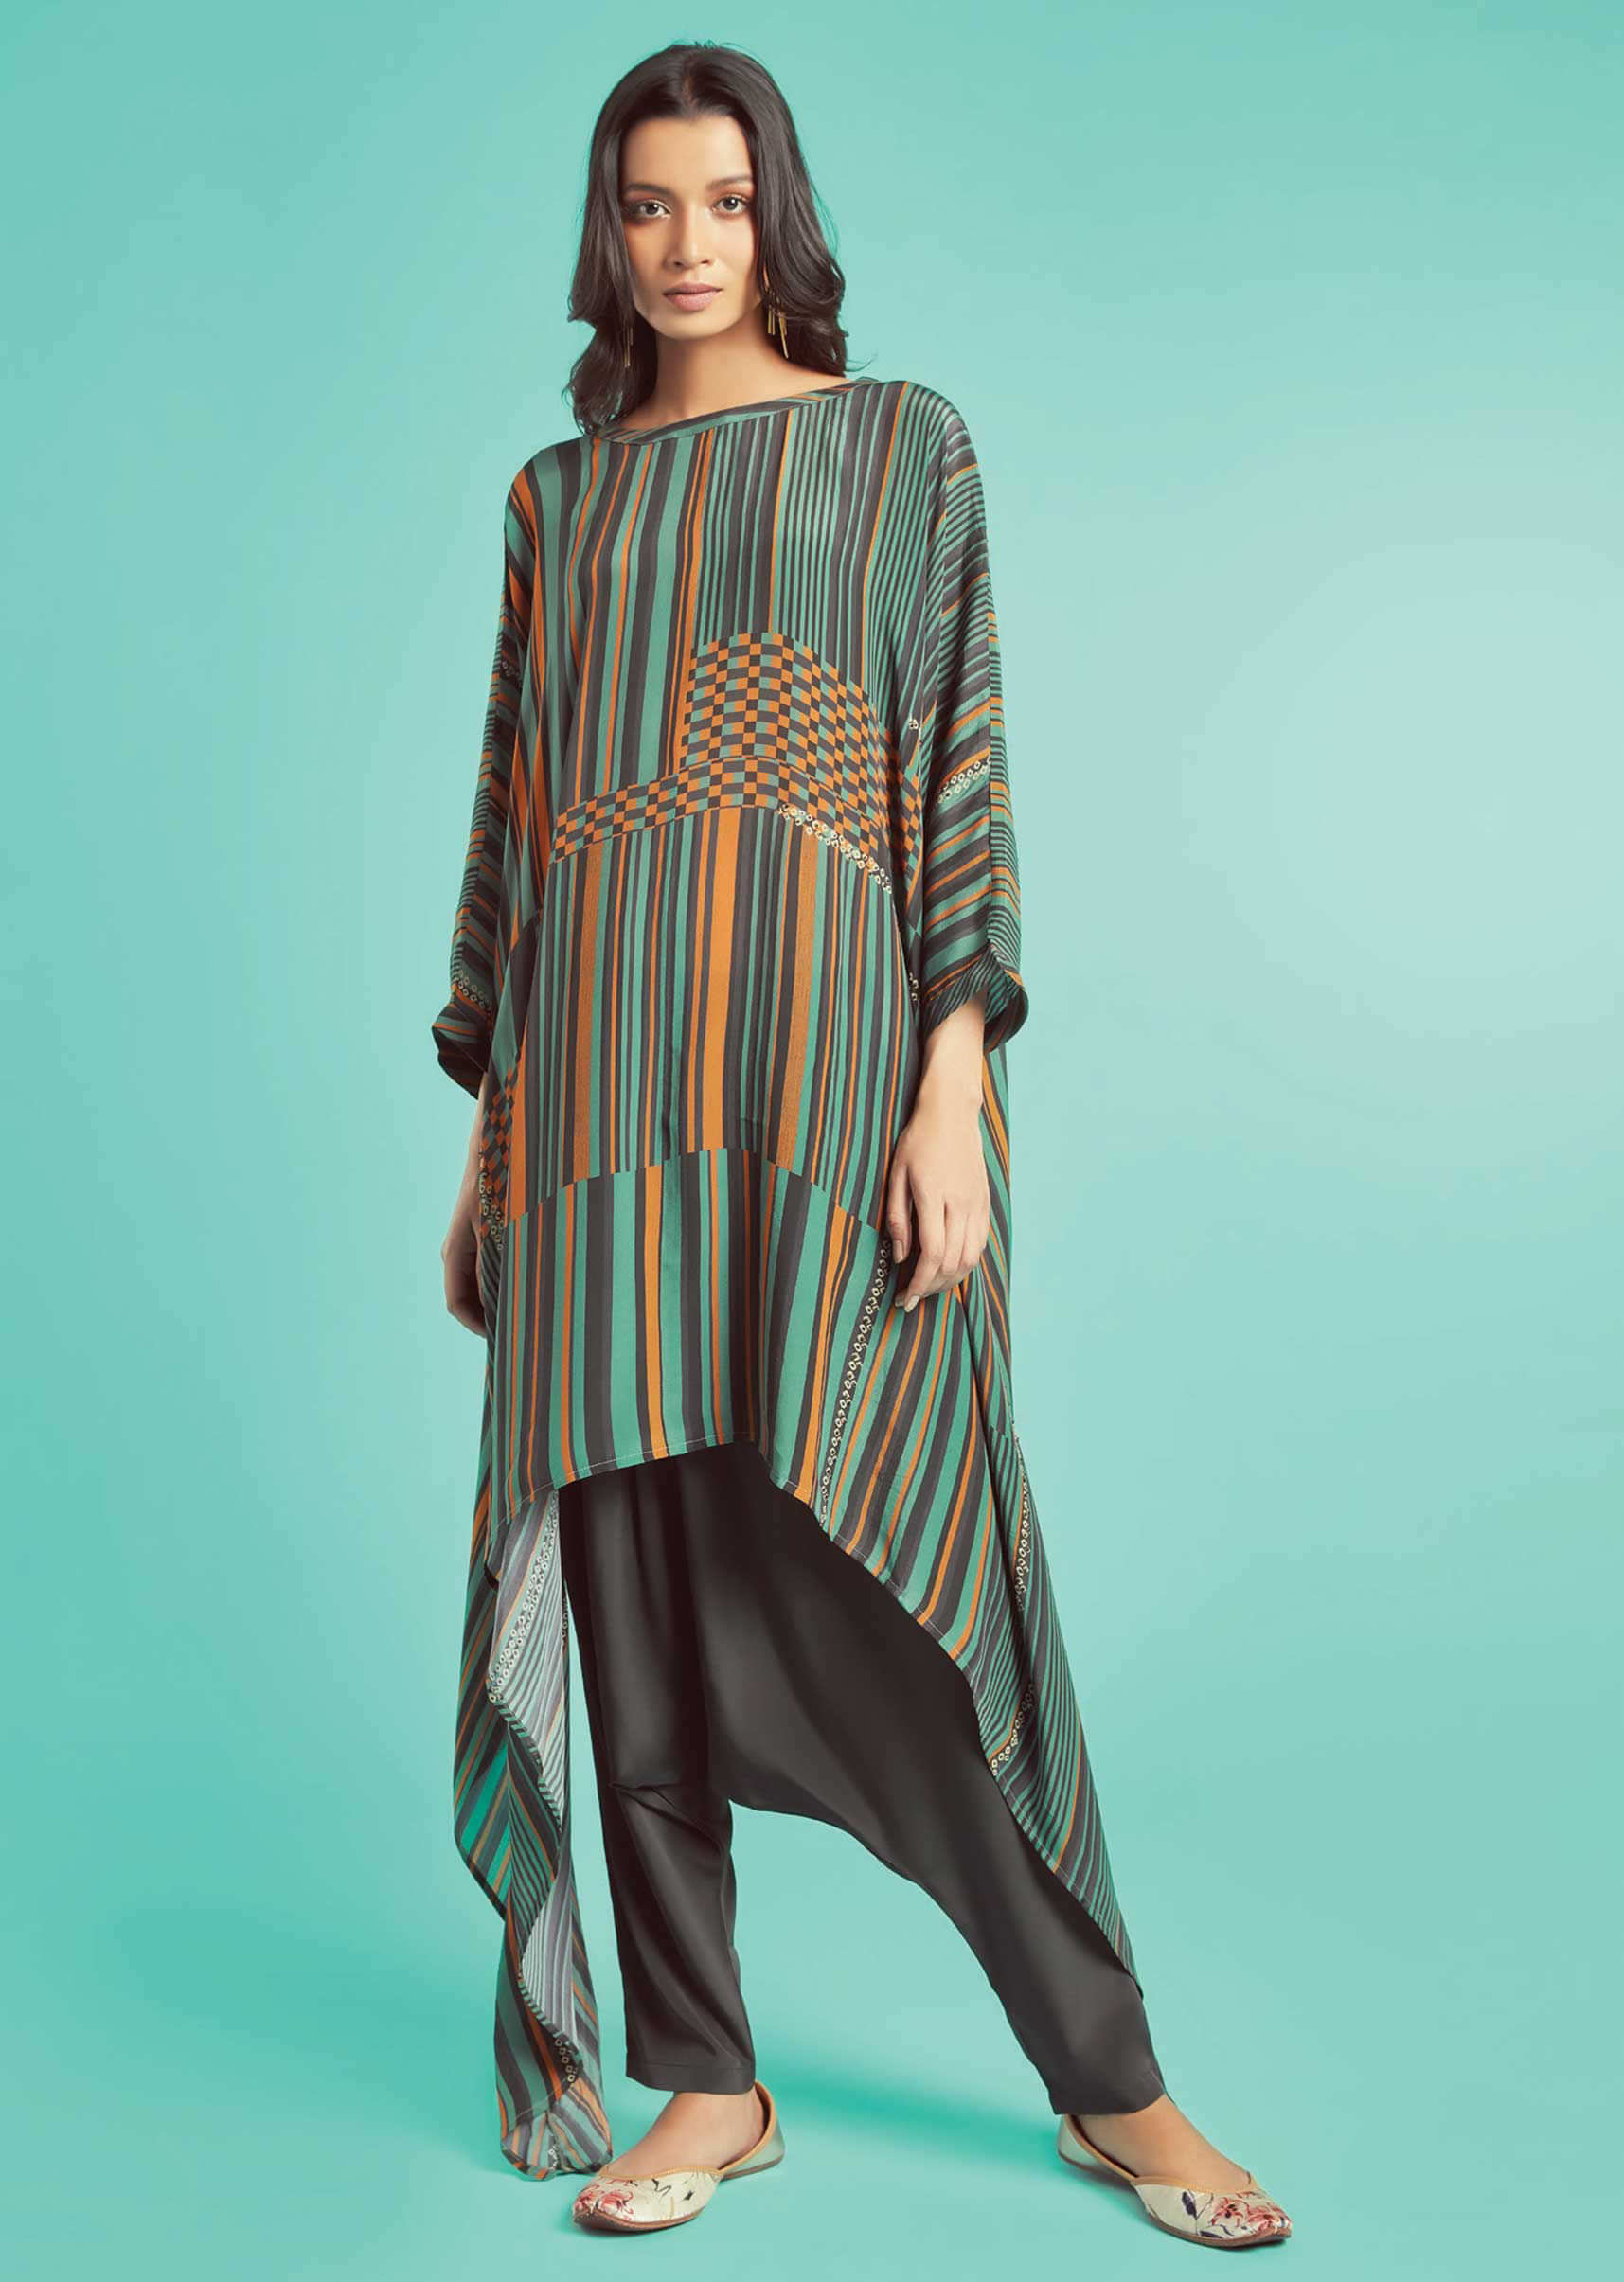 Fern Green Kurta Set With Multi Colored Striped And Checks Pattern And Grey Low Crotch Pants  